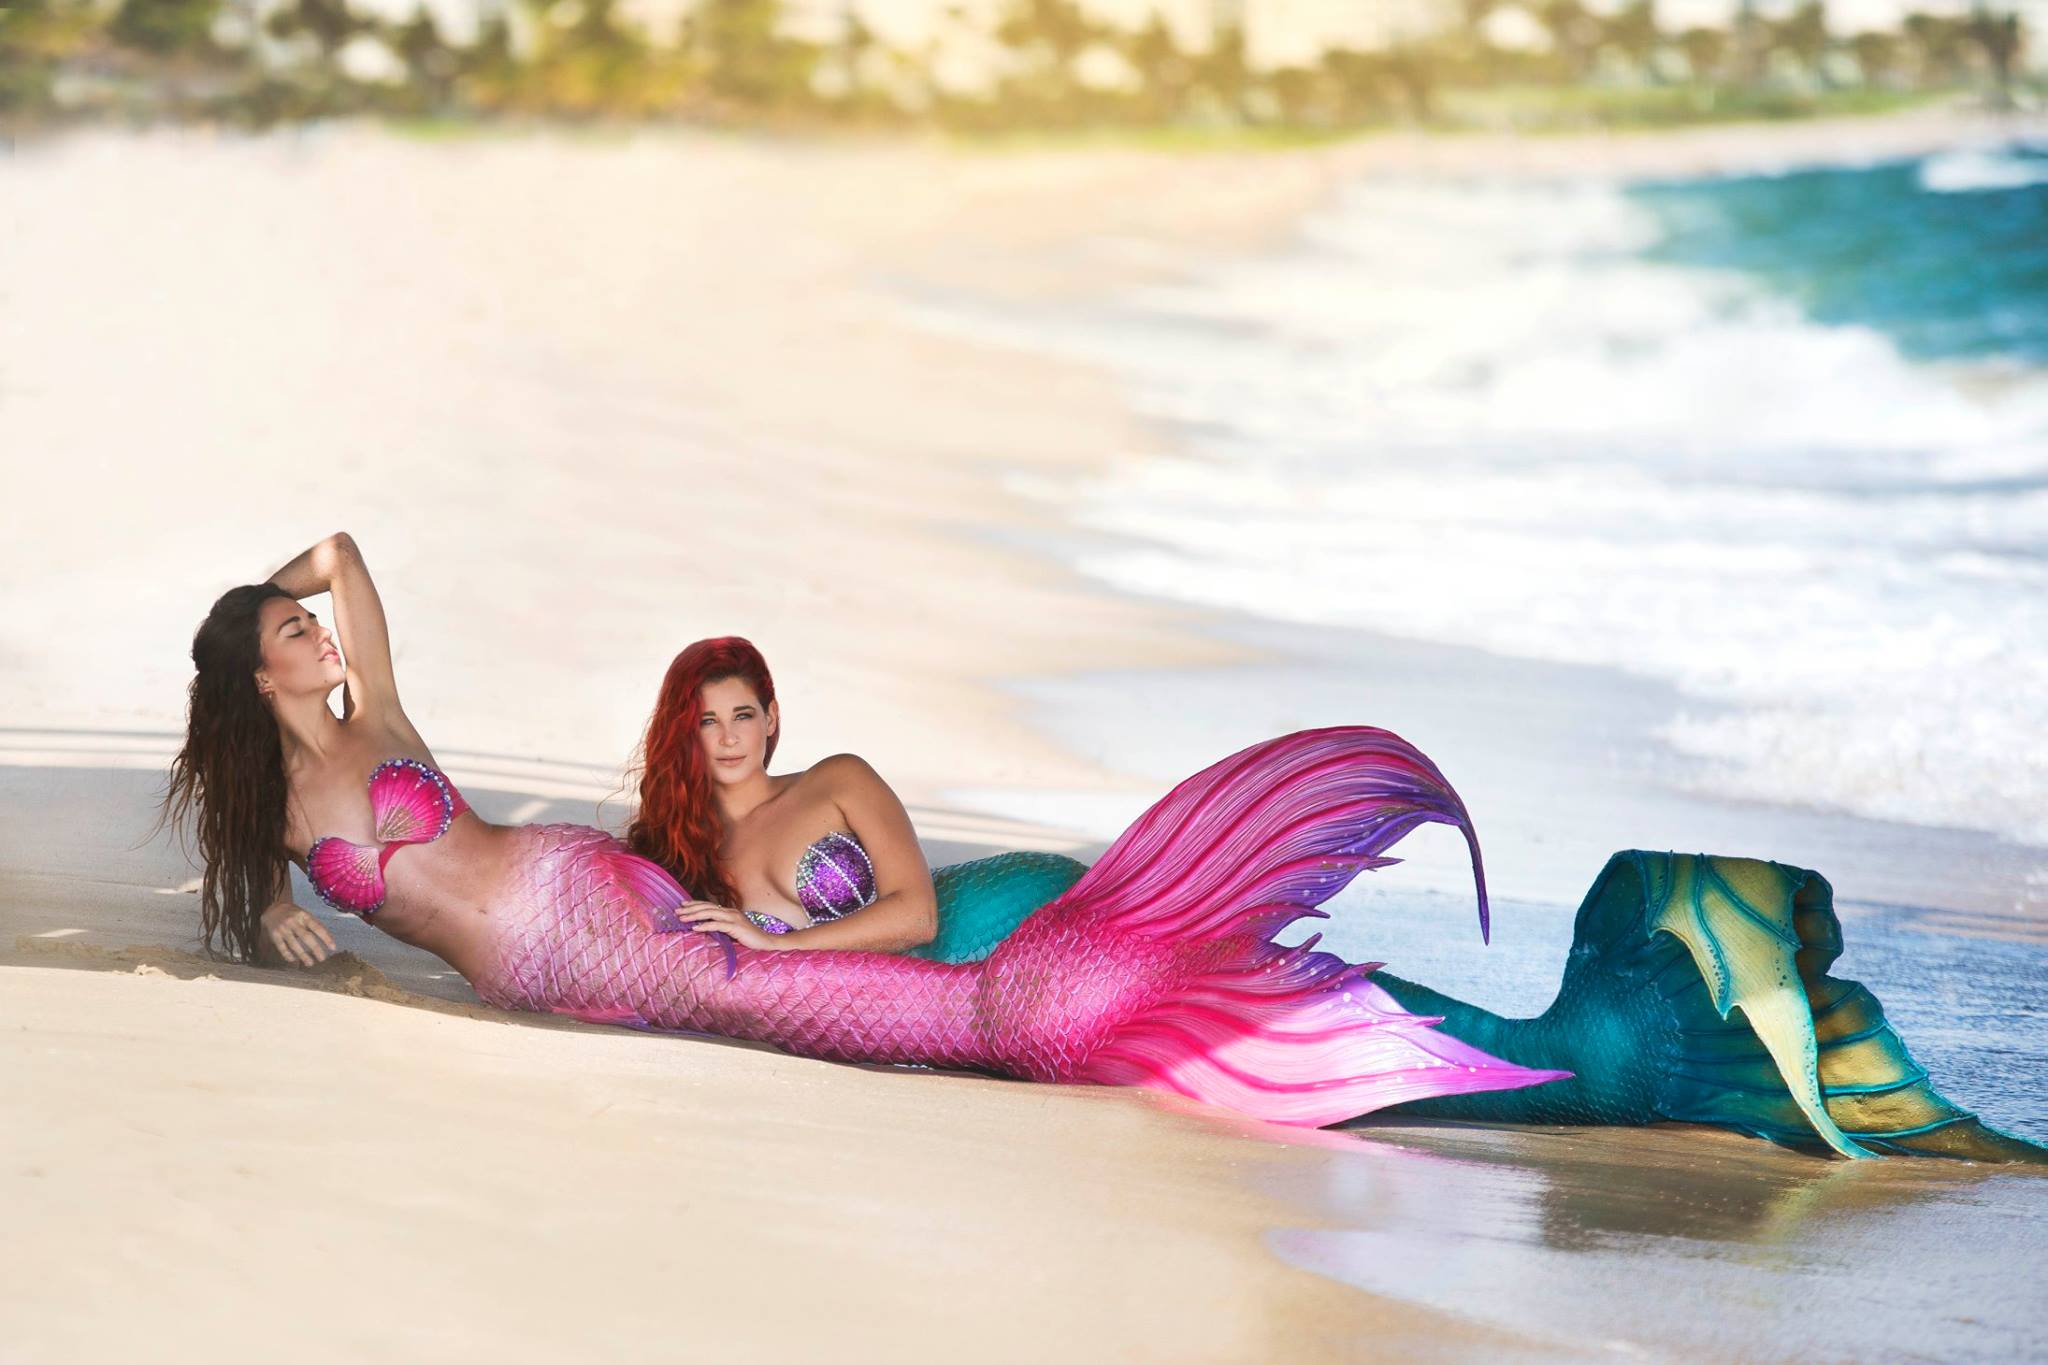 mermaid models pose friend tail photography